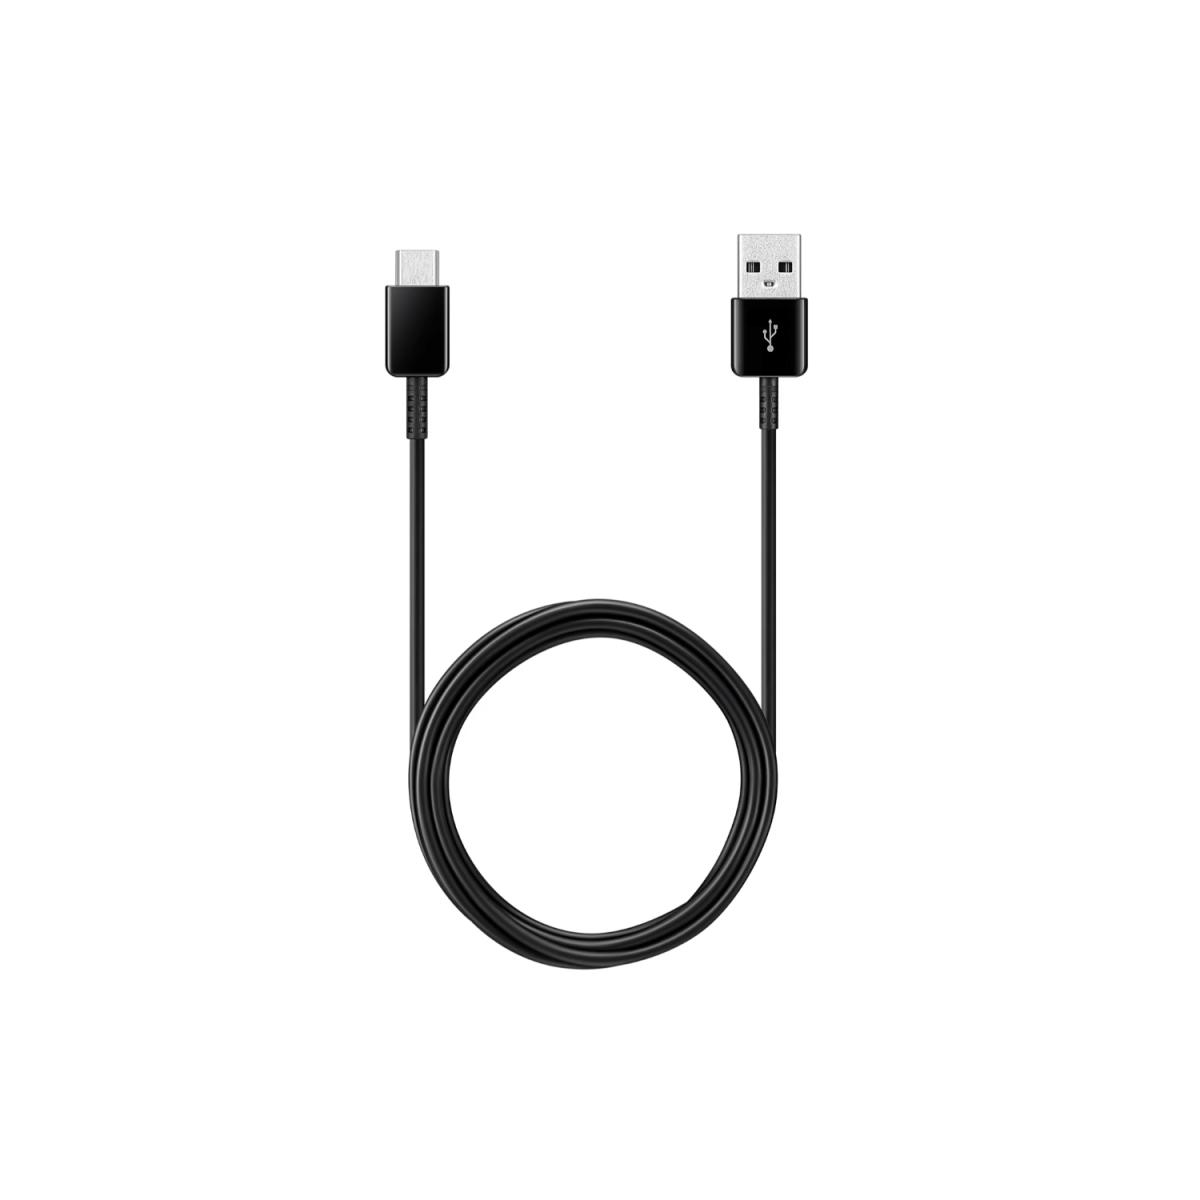 CABLE SAMSUNG USB TIPO C